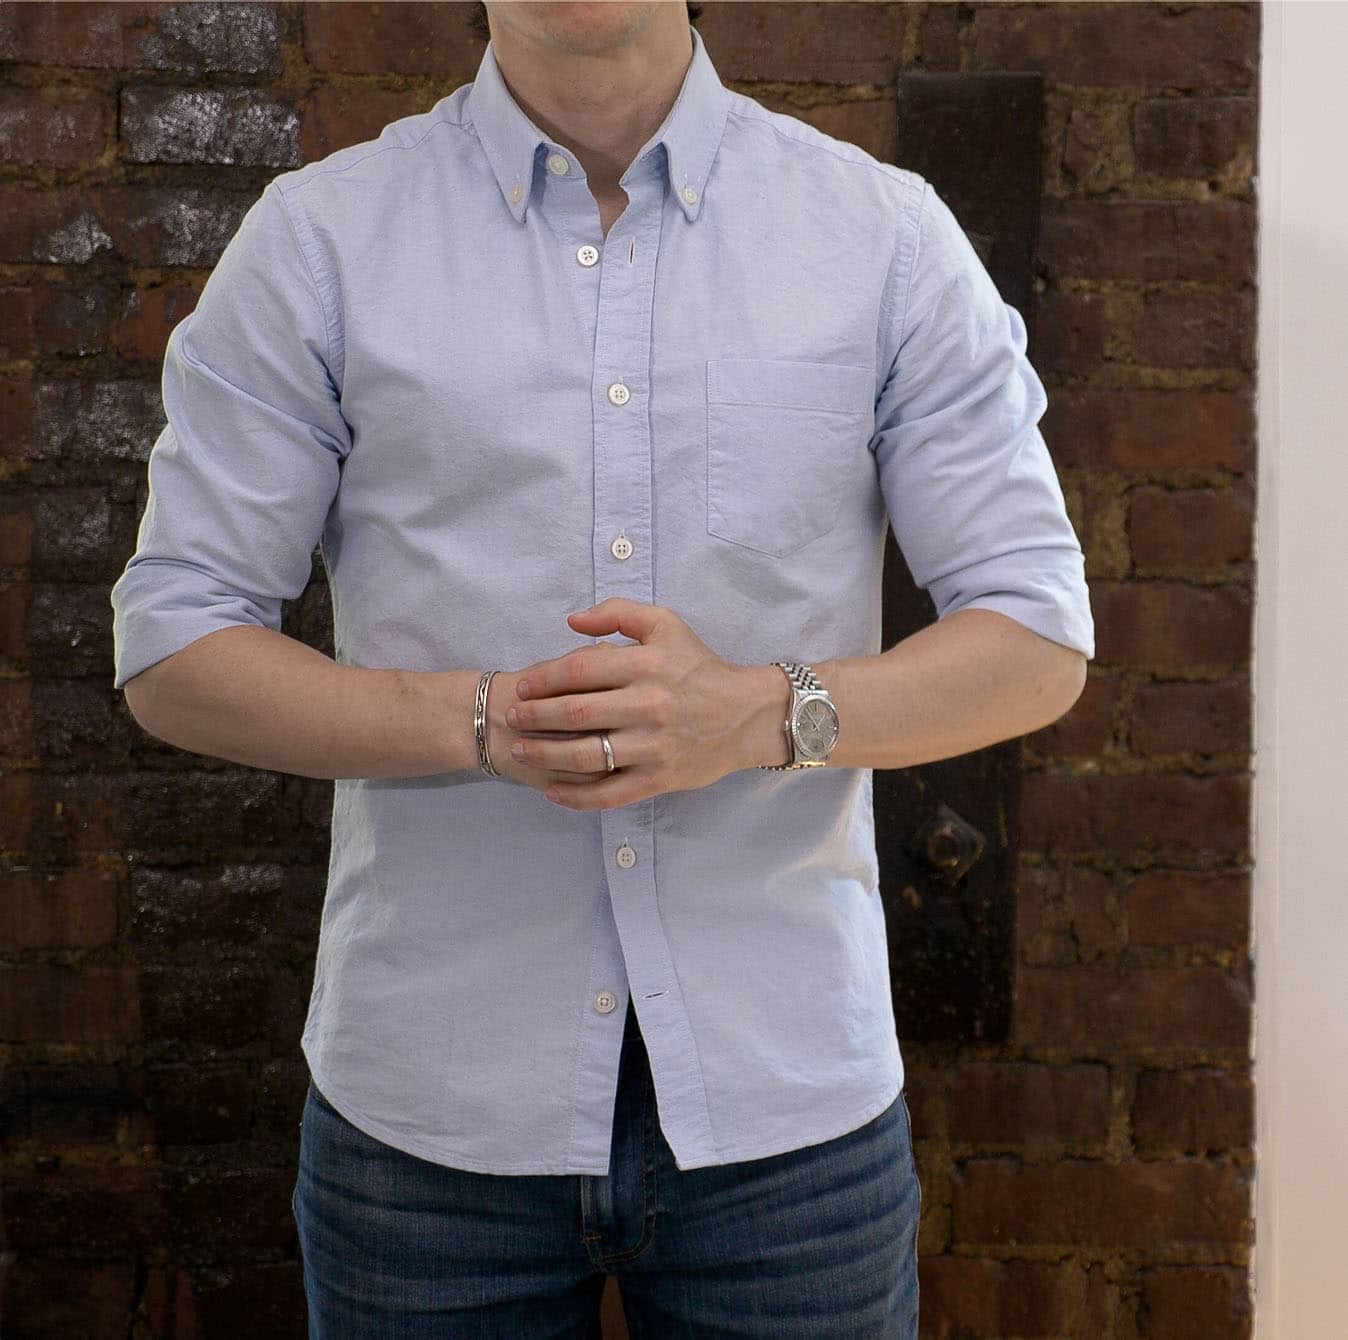 How to Put on and Take off a Shirt with Buttons Using One Arm